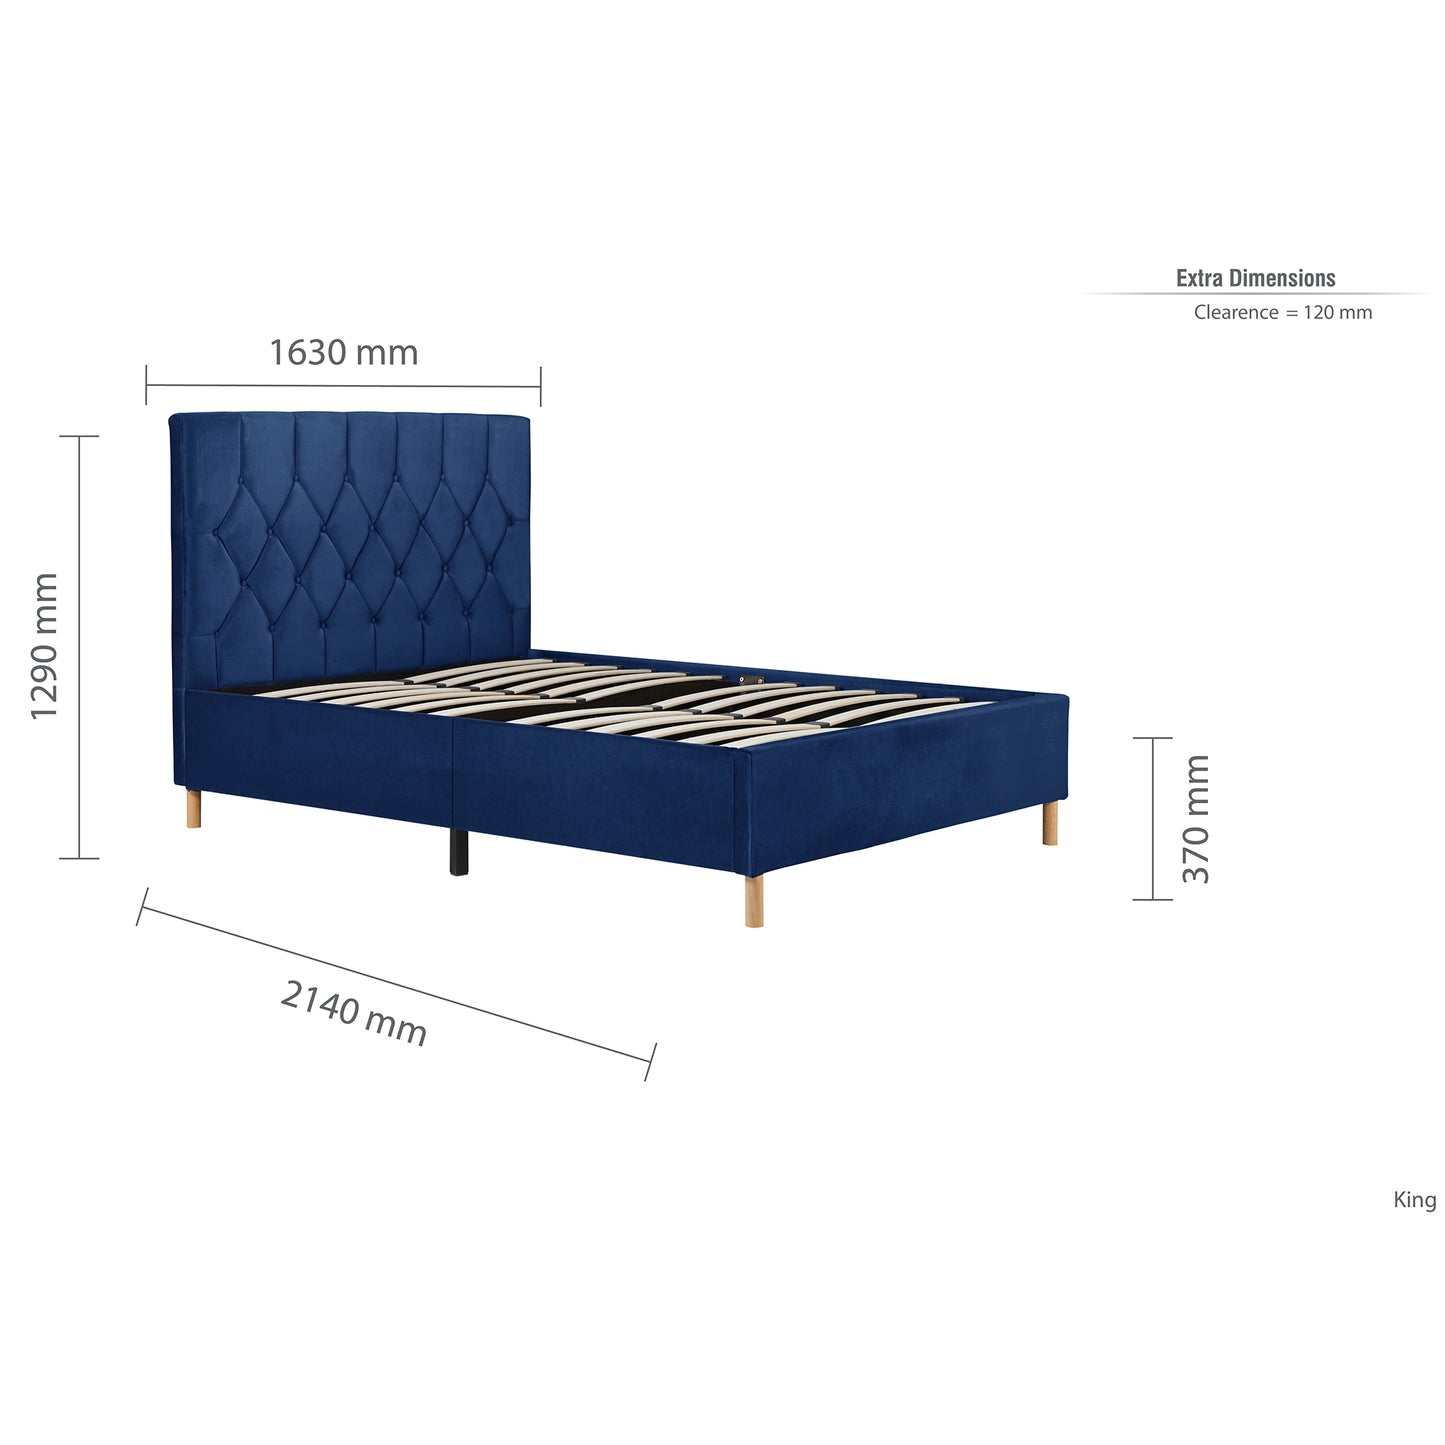 Loxley Blue Quilted Velvet Bed